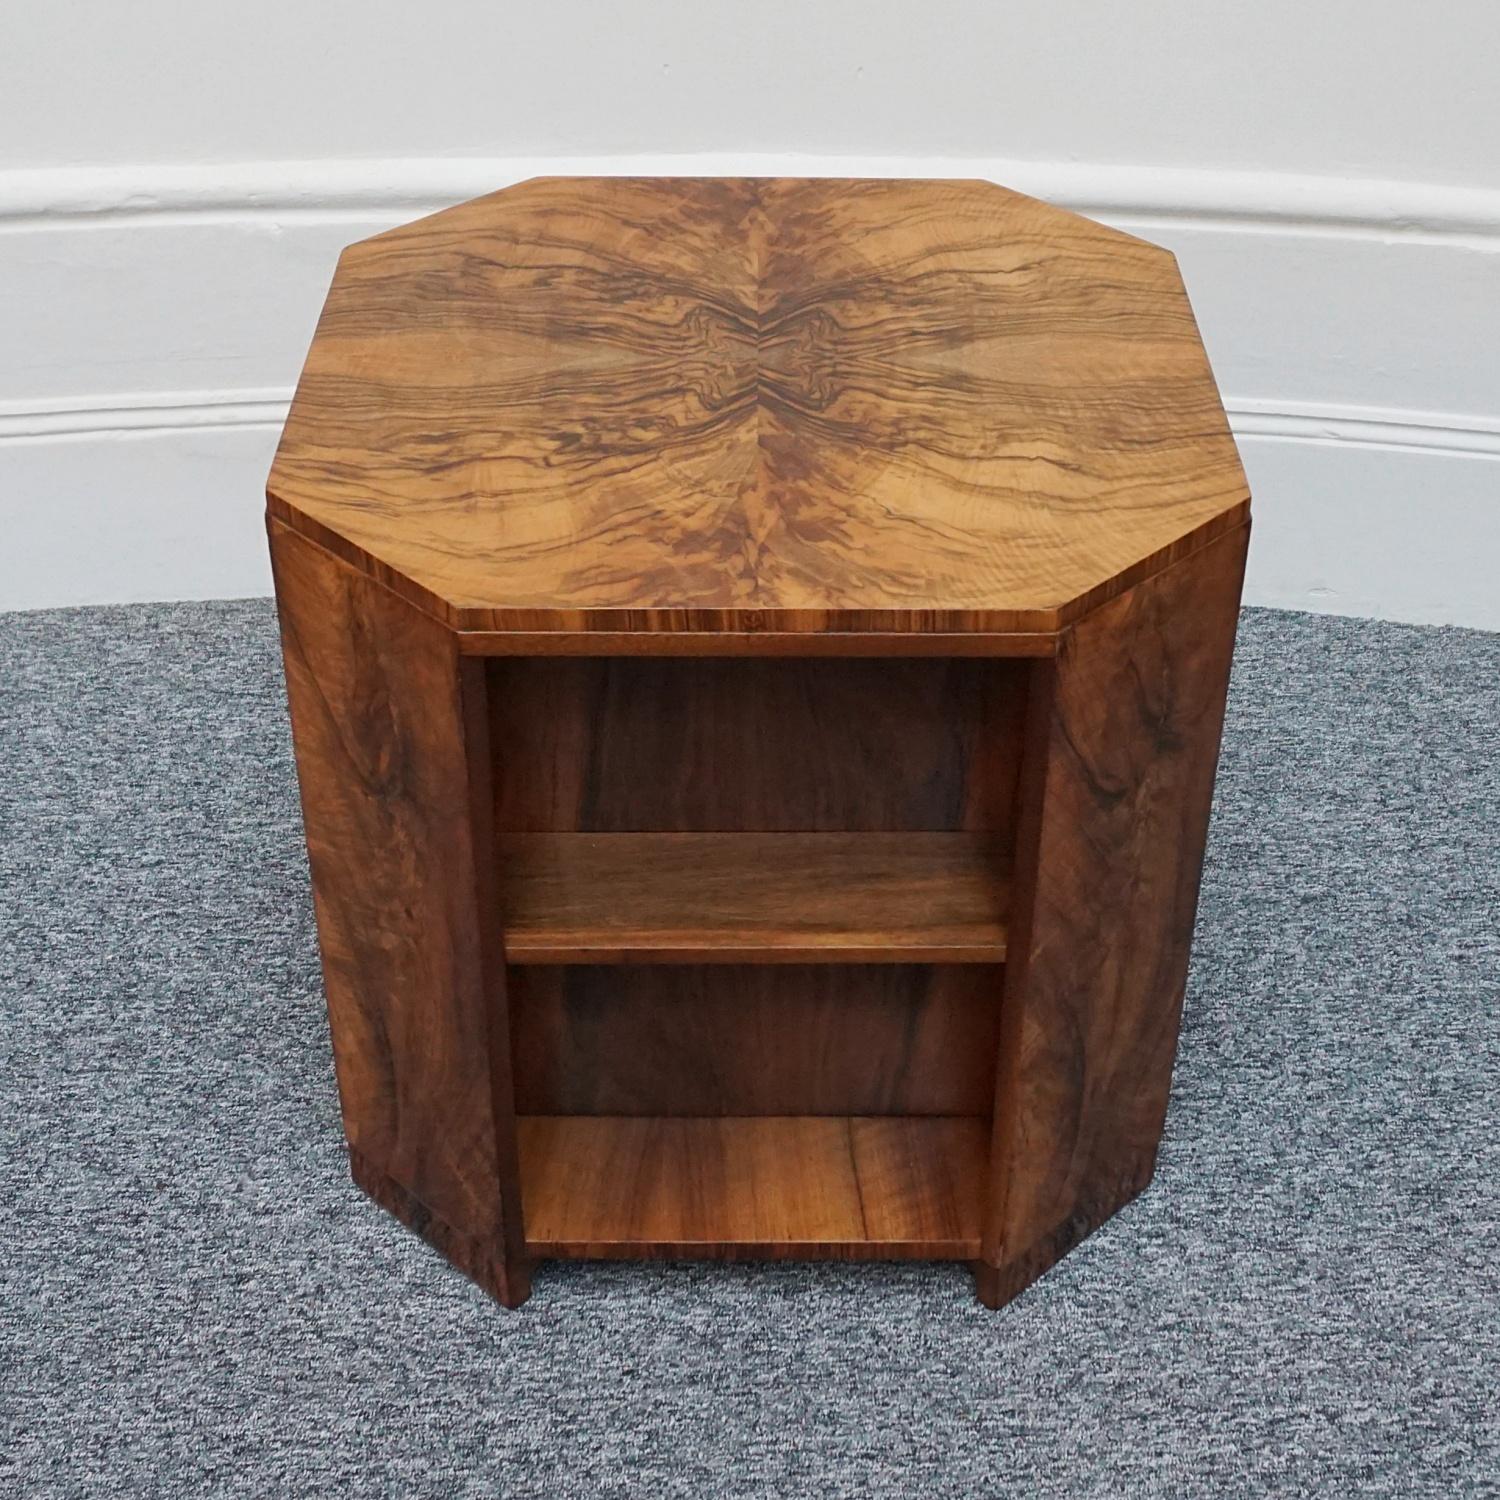 An Art Deco library table by Heal's of London. Burr walnut veneered with figured walnut banding on solid mahogany. 

Dimensions: H 58.5cm W 59cm D 59cm

Origin: English

Date: Circa 1935

Founded by John Harris Heal 1810, Heal’s London has